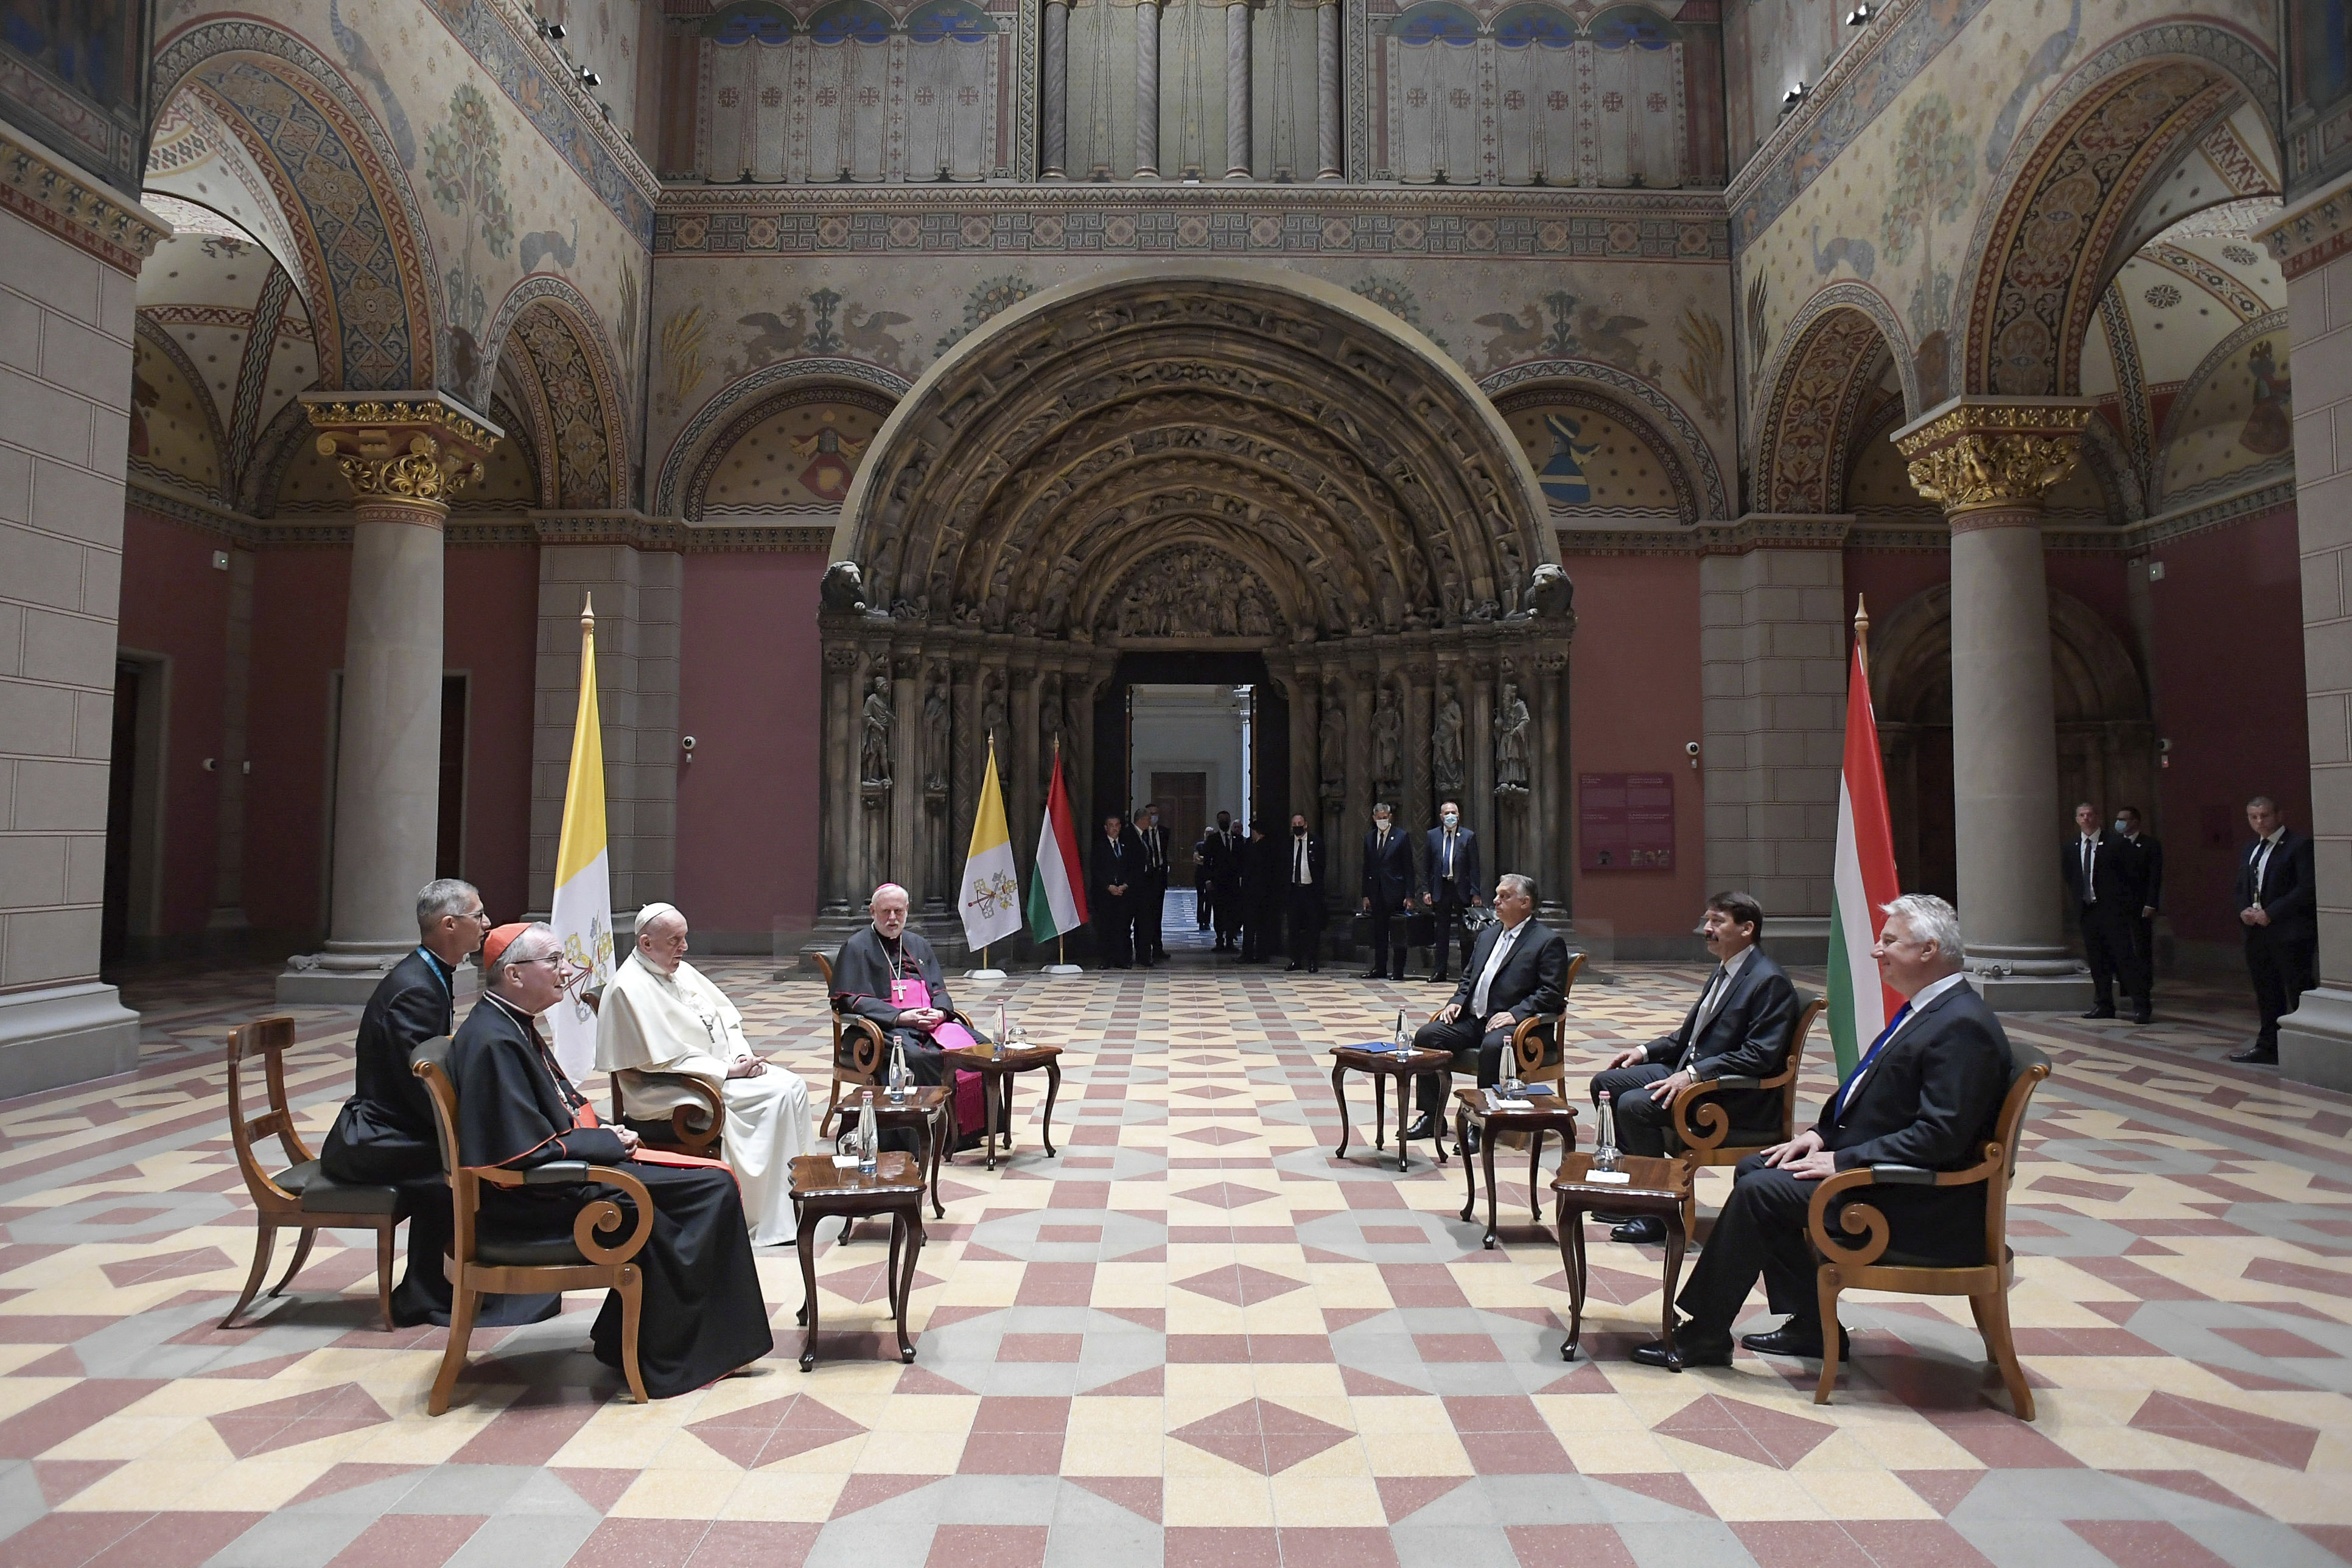 Pope Francis, left, meets Hungarian President Janos Ader, second from right, and Prime Minister Viktor Orban, third from right, at Budapest's Museum of Fine Arts 